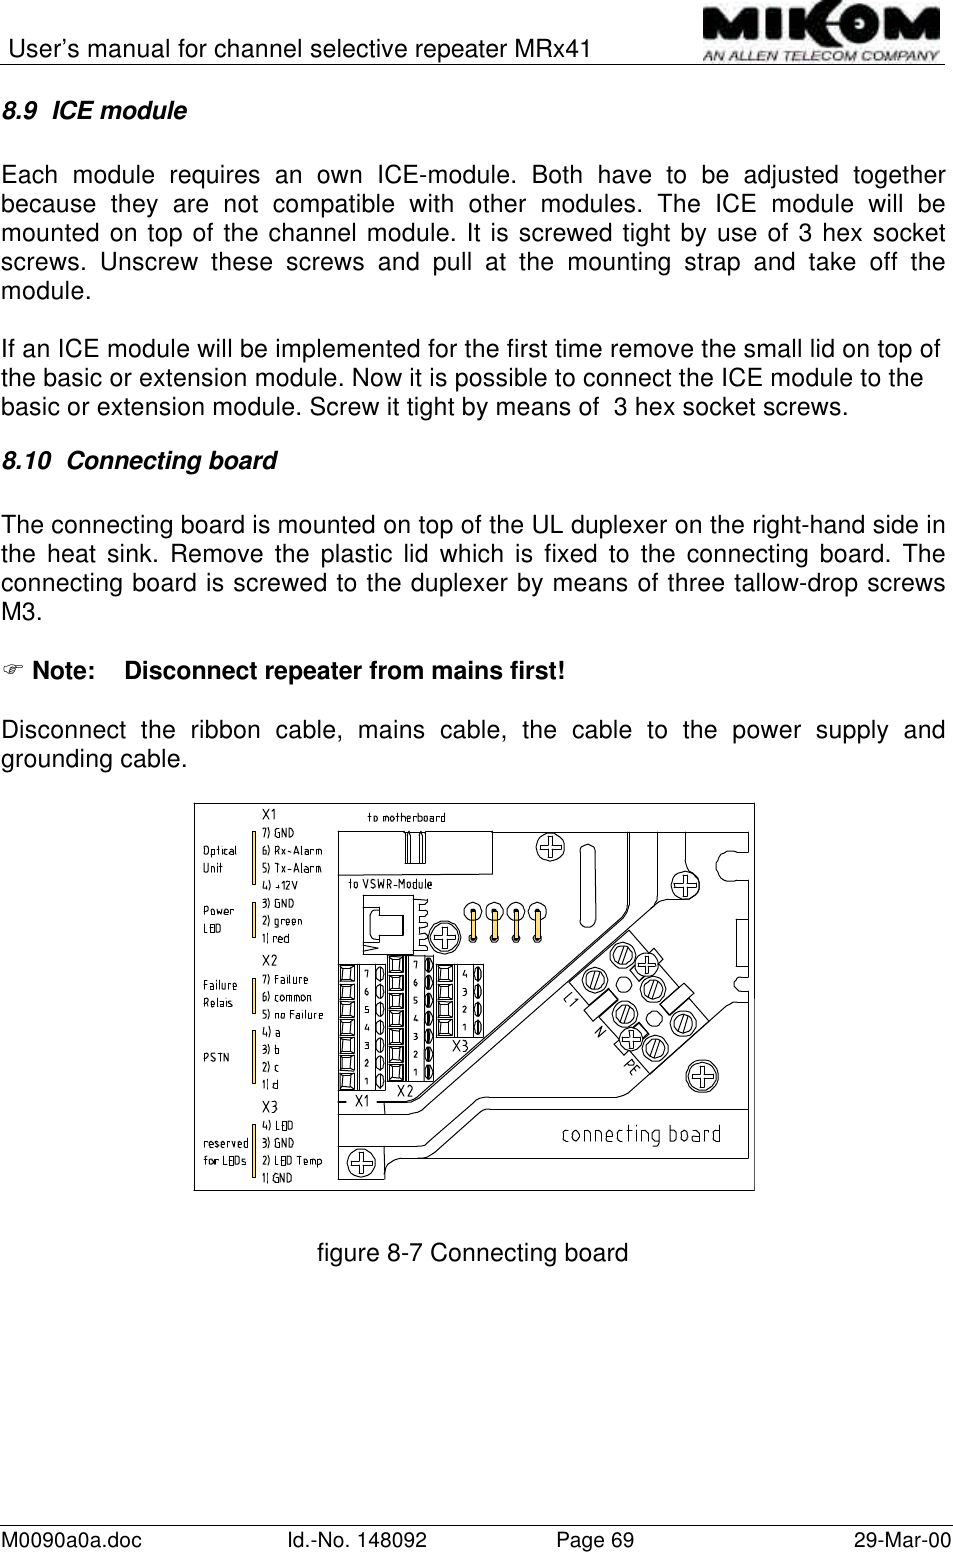 User’s manual for channel selective repeater MRx41M0090a0a.doc Id.-No. 148092 Page 69 29-Mar-008.9 ICE moduleEach module requires an own ICE-module. Both have to be adjusted togetherbecause they are not compatible with other modules. The ICE module will bemounted on top of the channel module. It is screwed tight by use of 3 hex socketscrews. Unscrew these screws and pull at the mounting strap and take off themodule.If an ICE module will be implemented for the first time remove the small lid on top ofthe basic or extension module. Now it is possible to connect the ICE module to thebasic or extension module. Screw it tight by means of  3 hex socket screws.8.10 Connecting boardThe connecting board is mounted on top of the UL duplexer on the right-hand side inthe heat sink. Remove the plastic lid which is fixed to the connecting board. Theconnecting board is screwed to the duplexer by means of three tallow-drop screwsM3.F Note: Disconnect repeater from mains first!Disconnect the ribbon cable, mains cable, the cable to the power supply andgrounding cable.figure 8-7 Connecting board